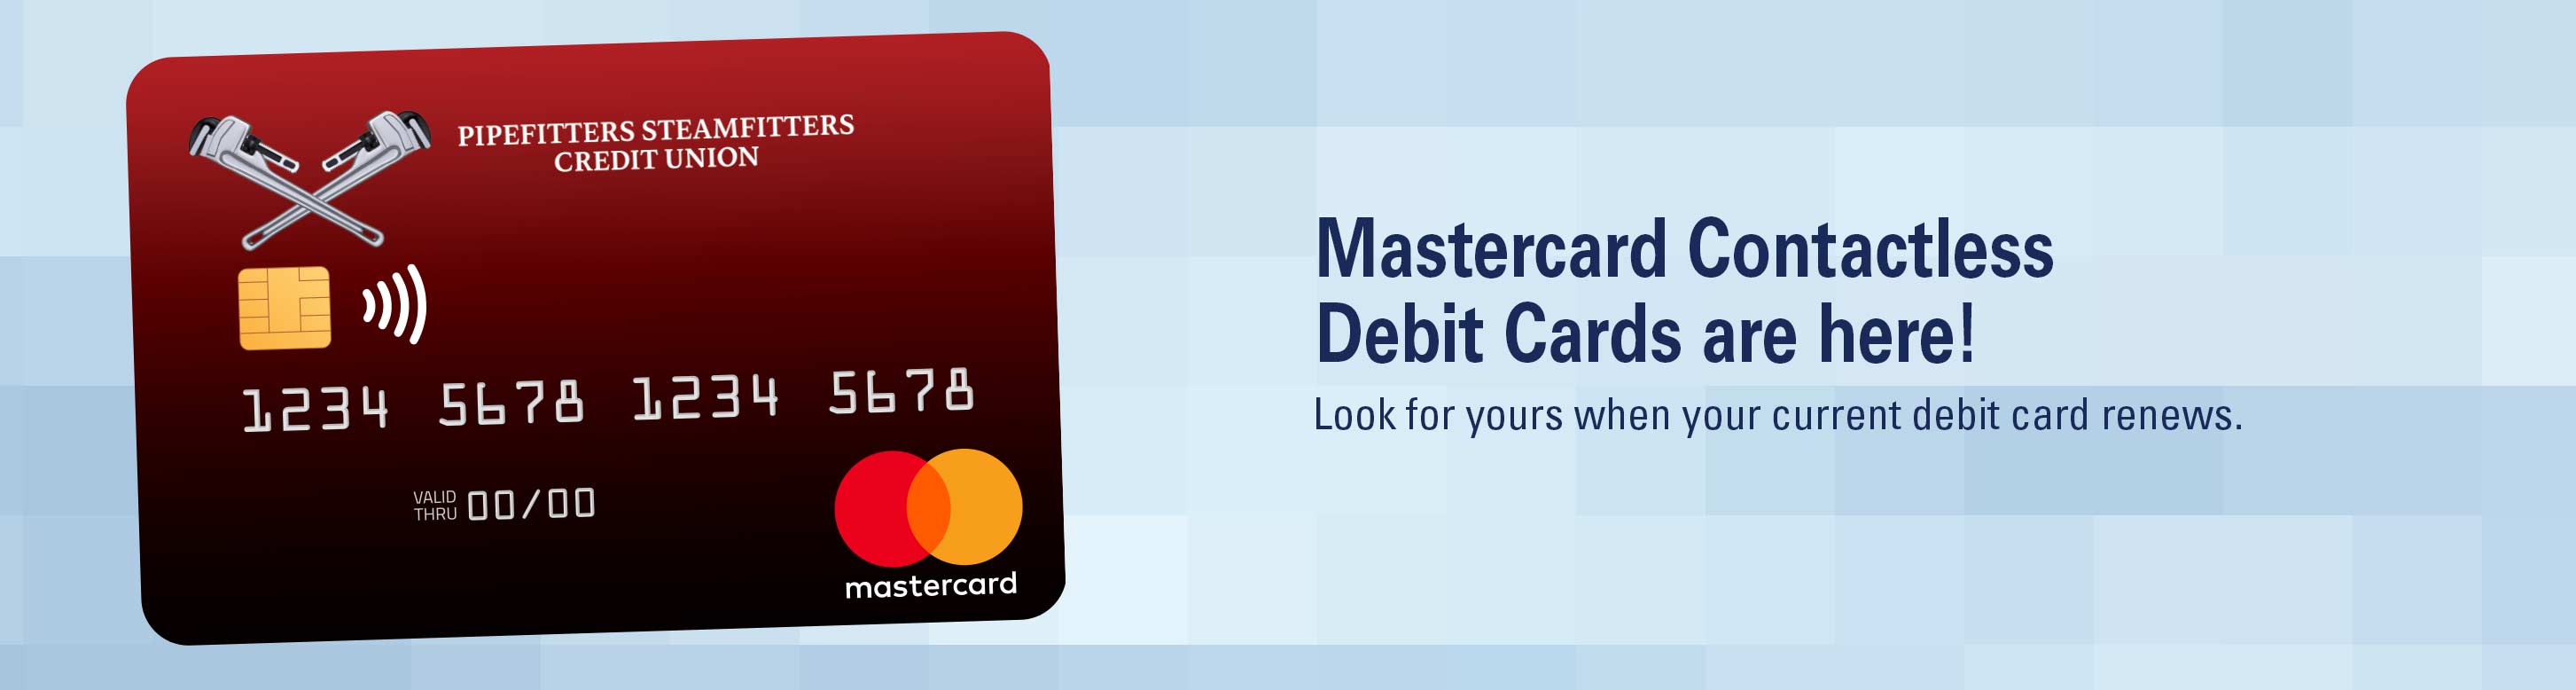 Mastercard contactless debit cards are here! Look for yours when your current debit card renews.